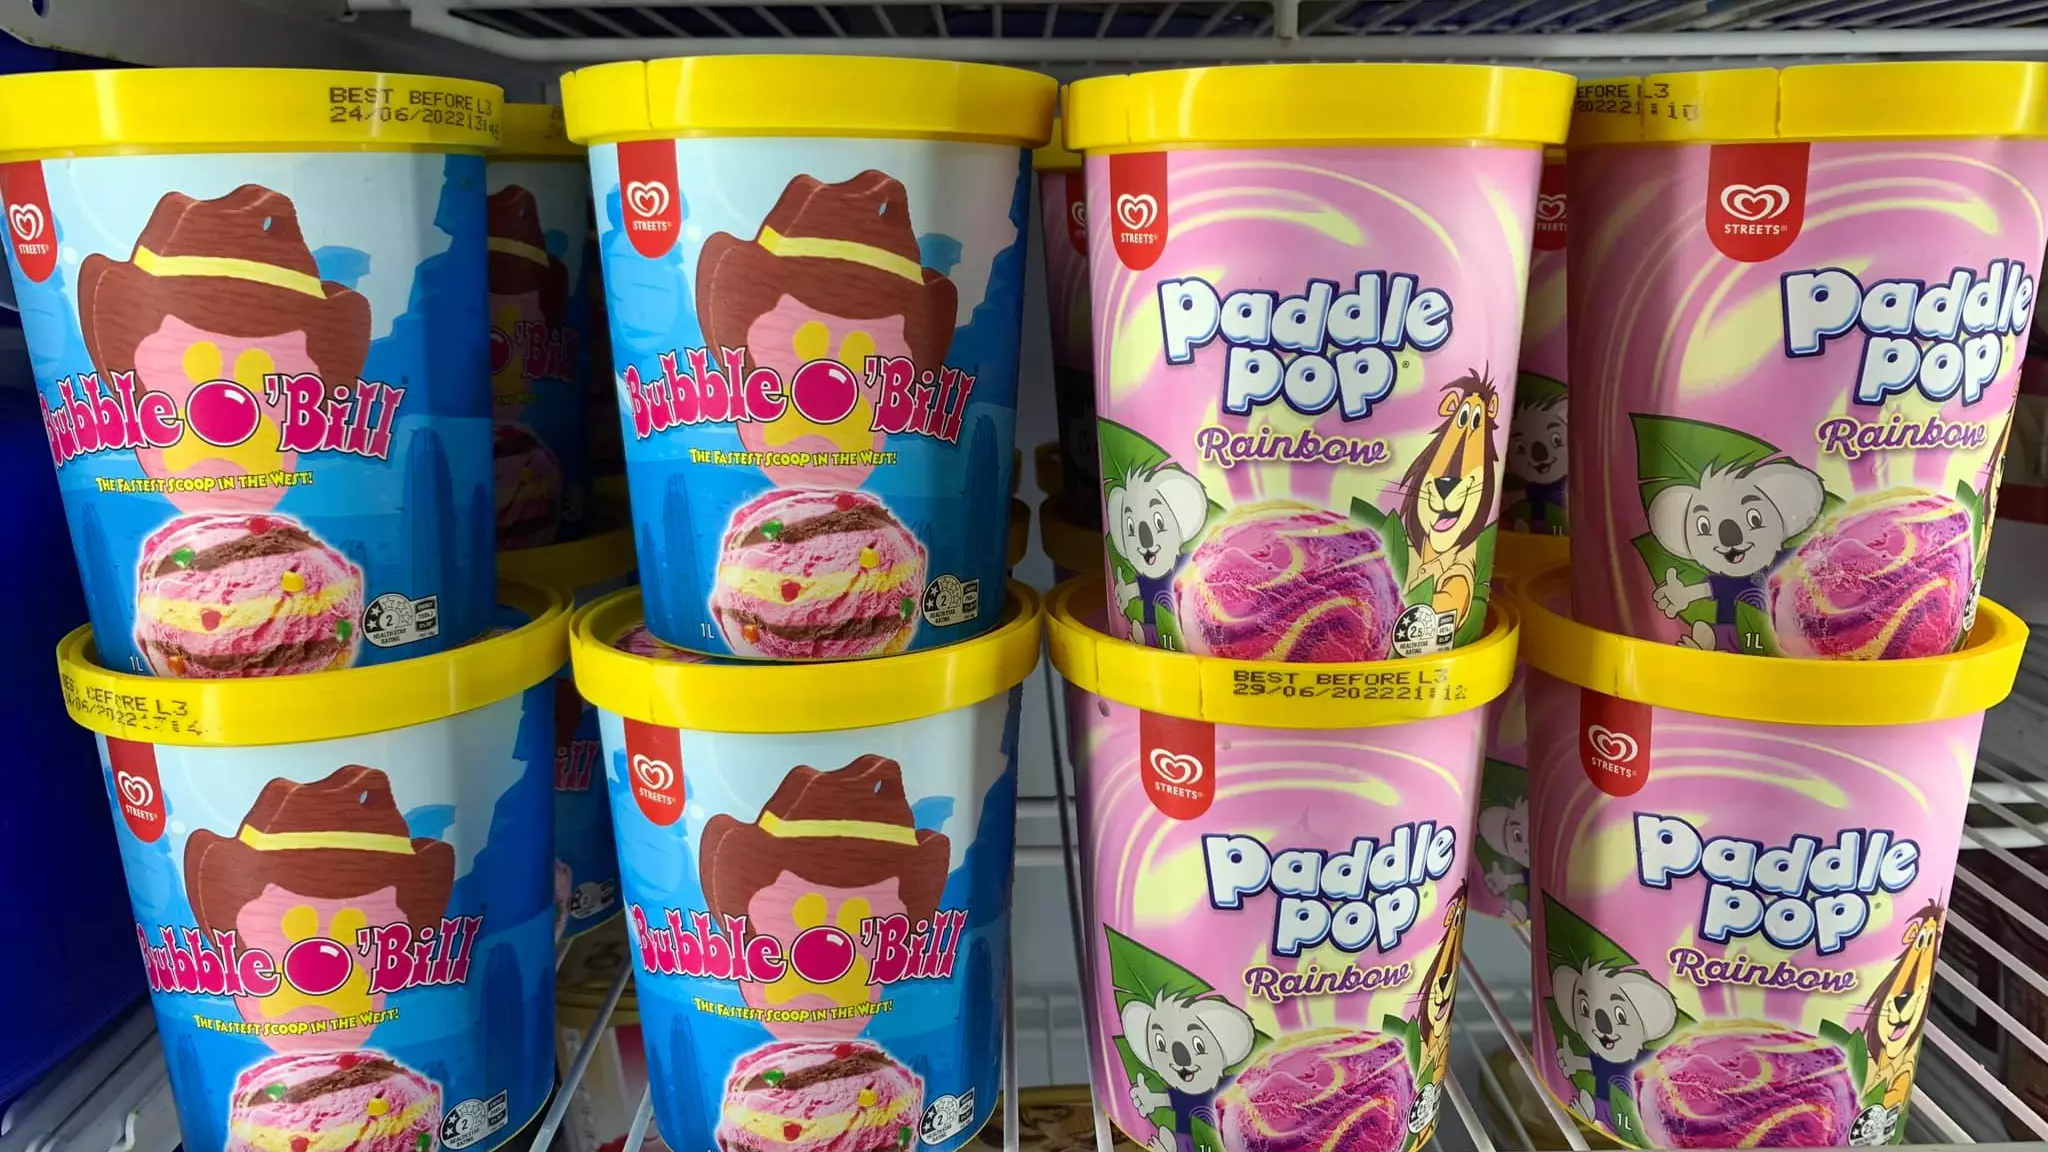 You Can Now Buy Bubble O'Bill And Paddle Pop Ice Cream By The Tub In Australia